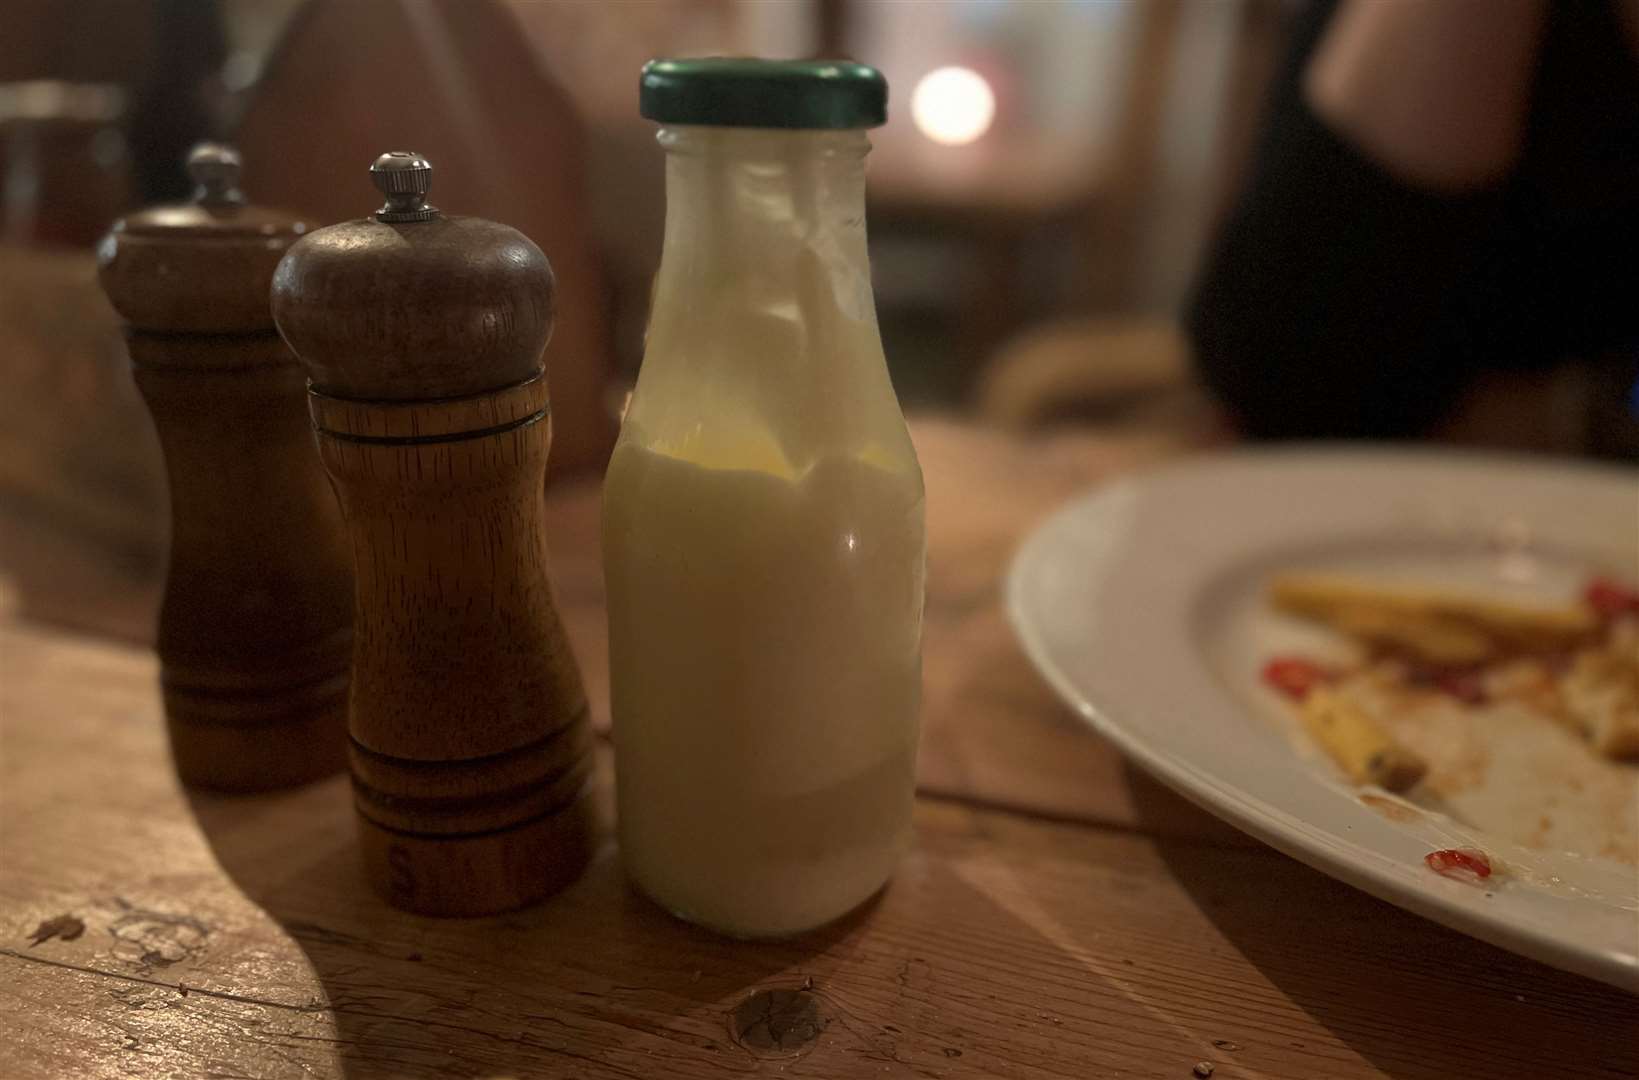 The mayo in a bottle idea was nice - but a pain to actually get any out